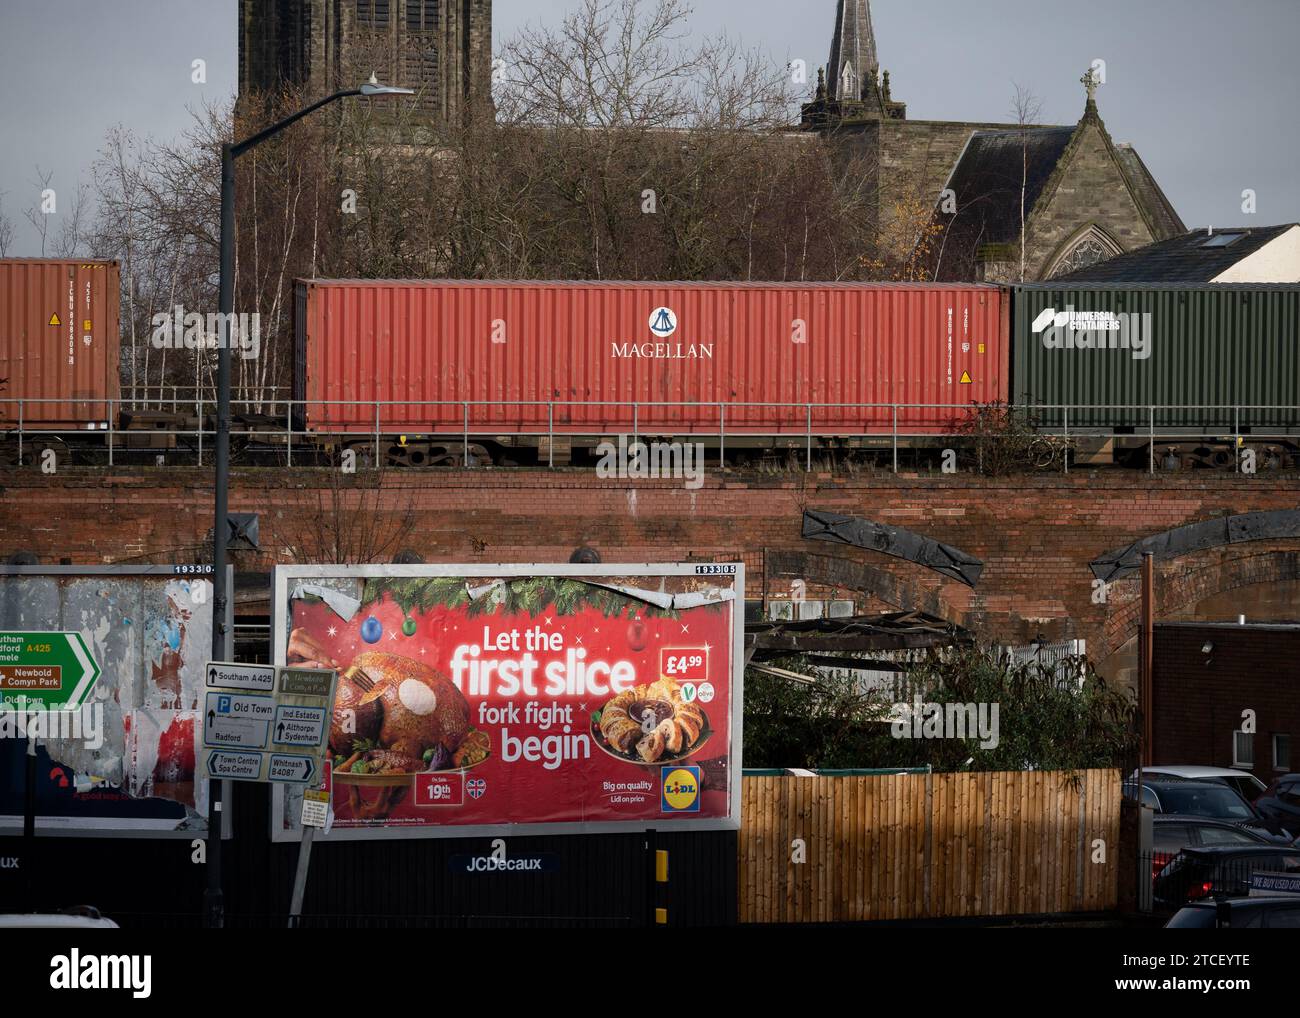 Magellan shipping container on a freightliner train, Leamington Spa, Warwickshire, UK Stock Photo